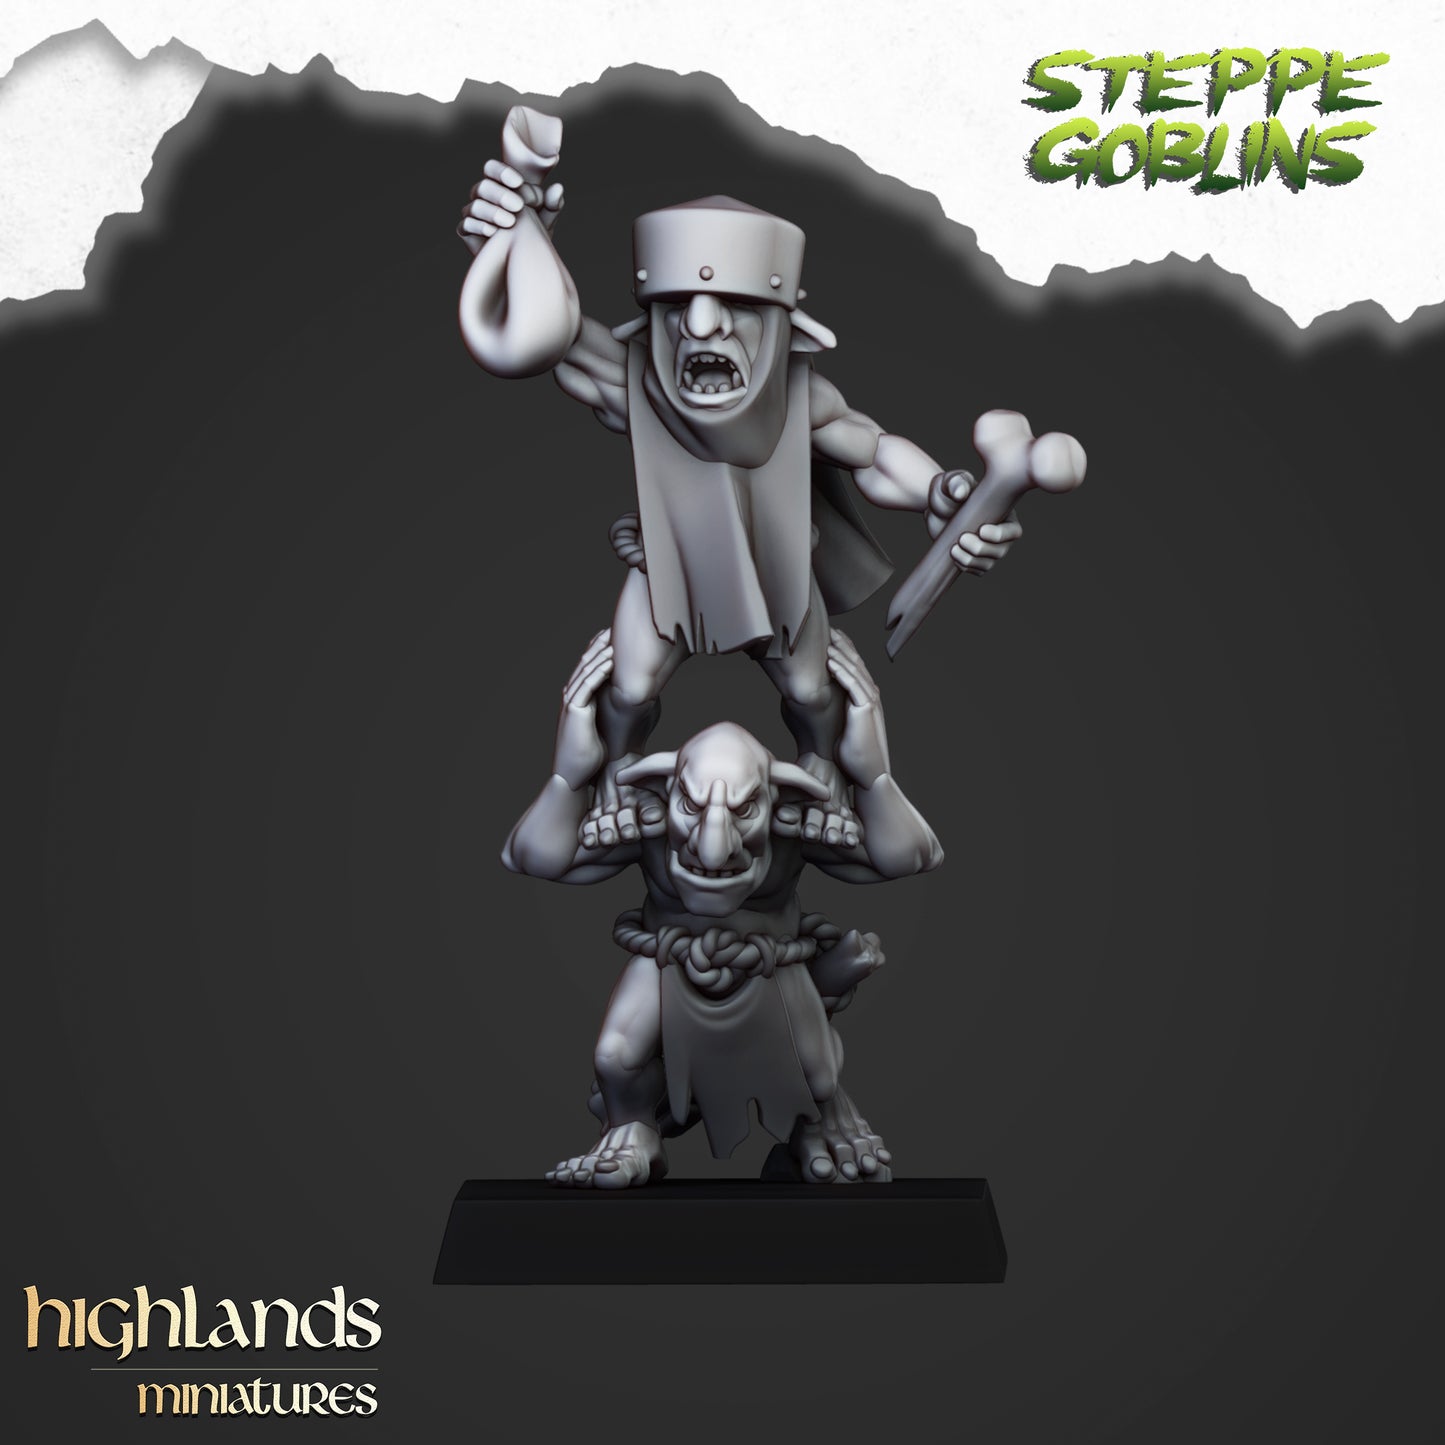 Steppe Goblors from Highlands Miniatures